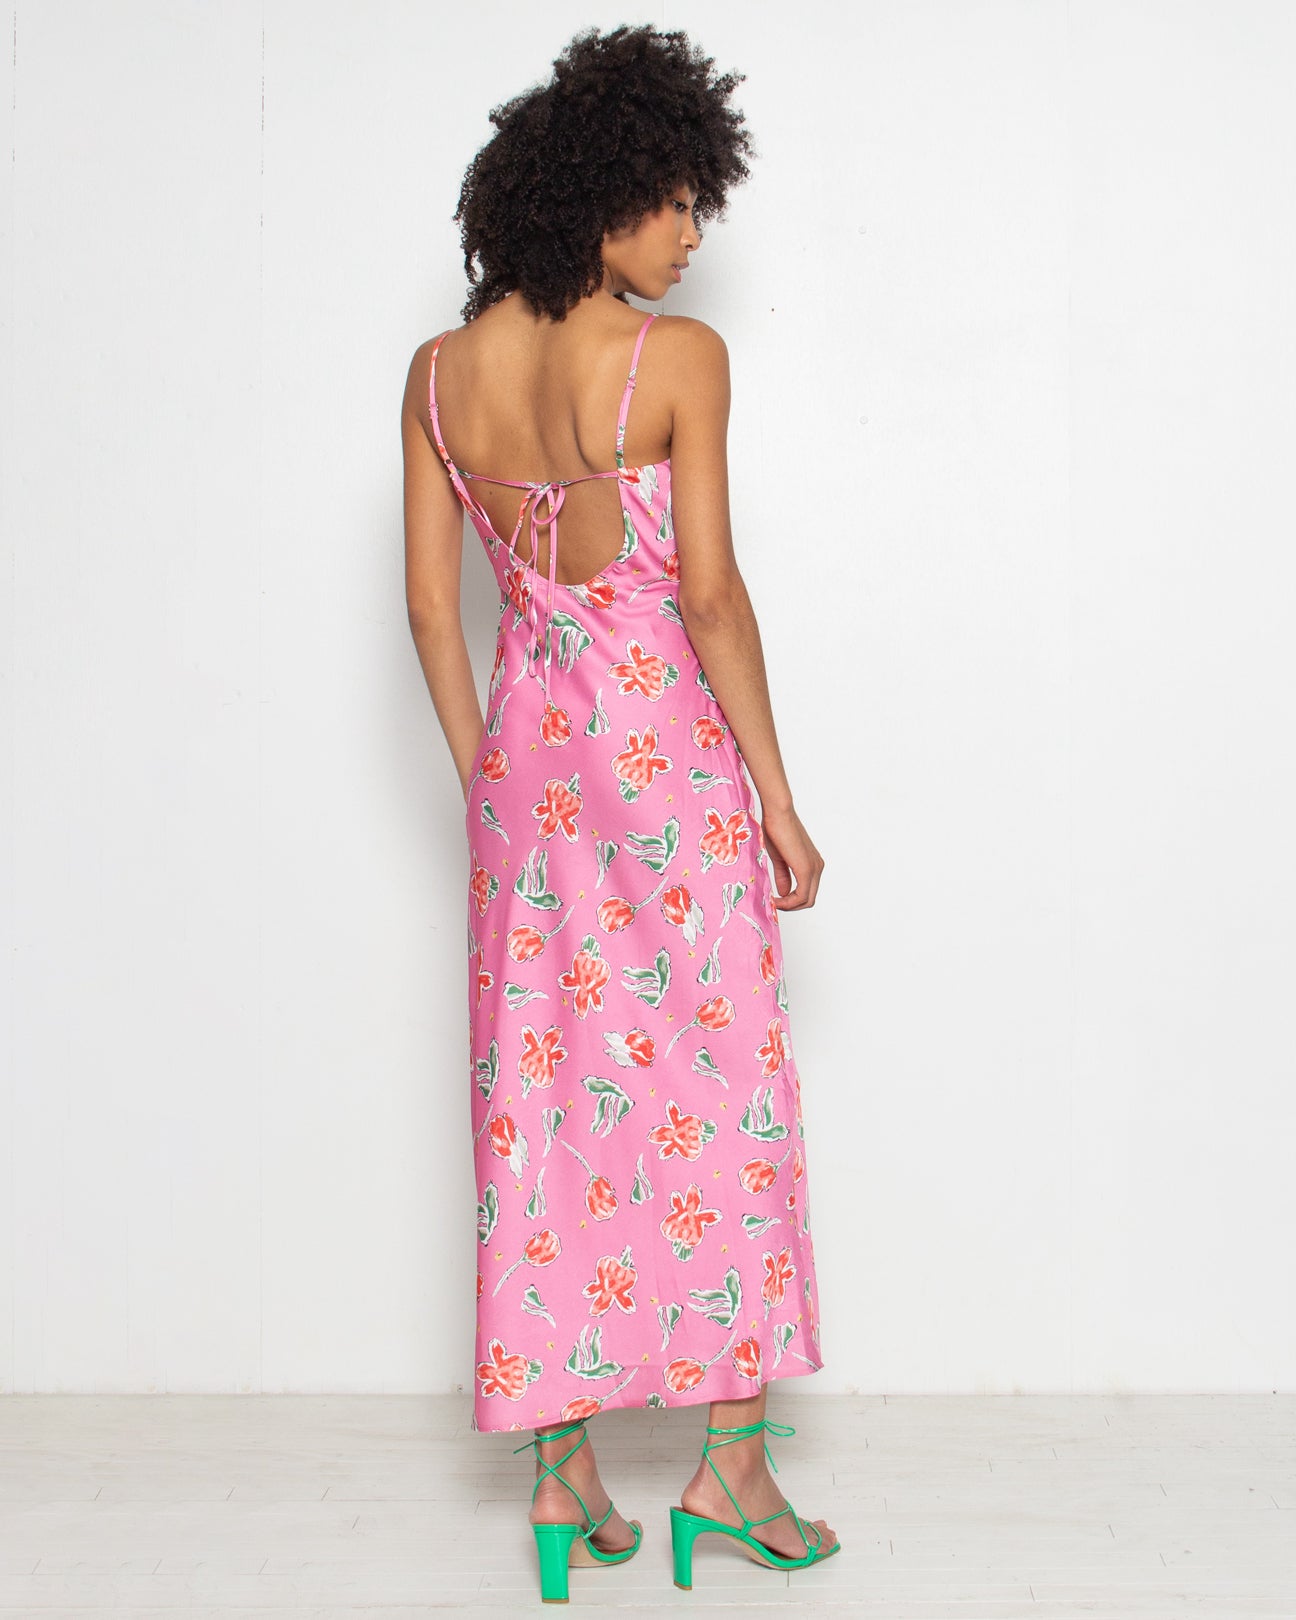 PERSONS Ophelia Cut Out Maxi Dress in Bubblegum Floral